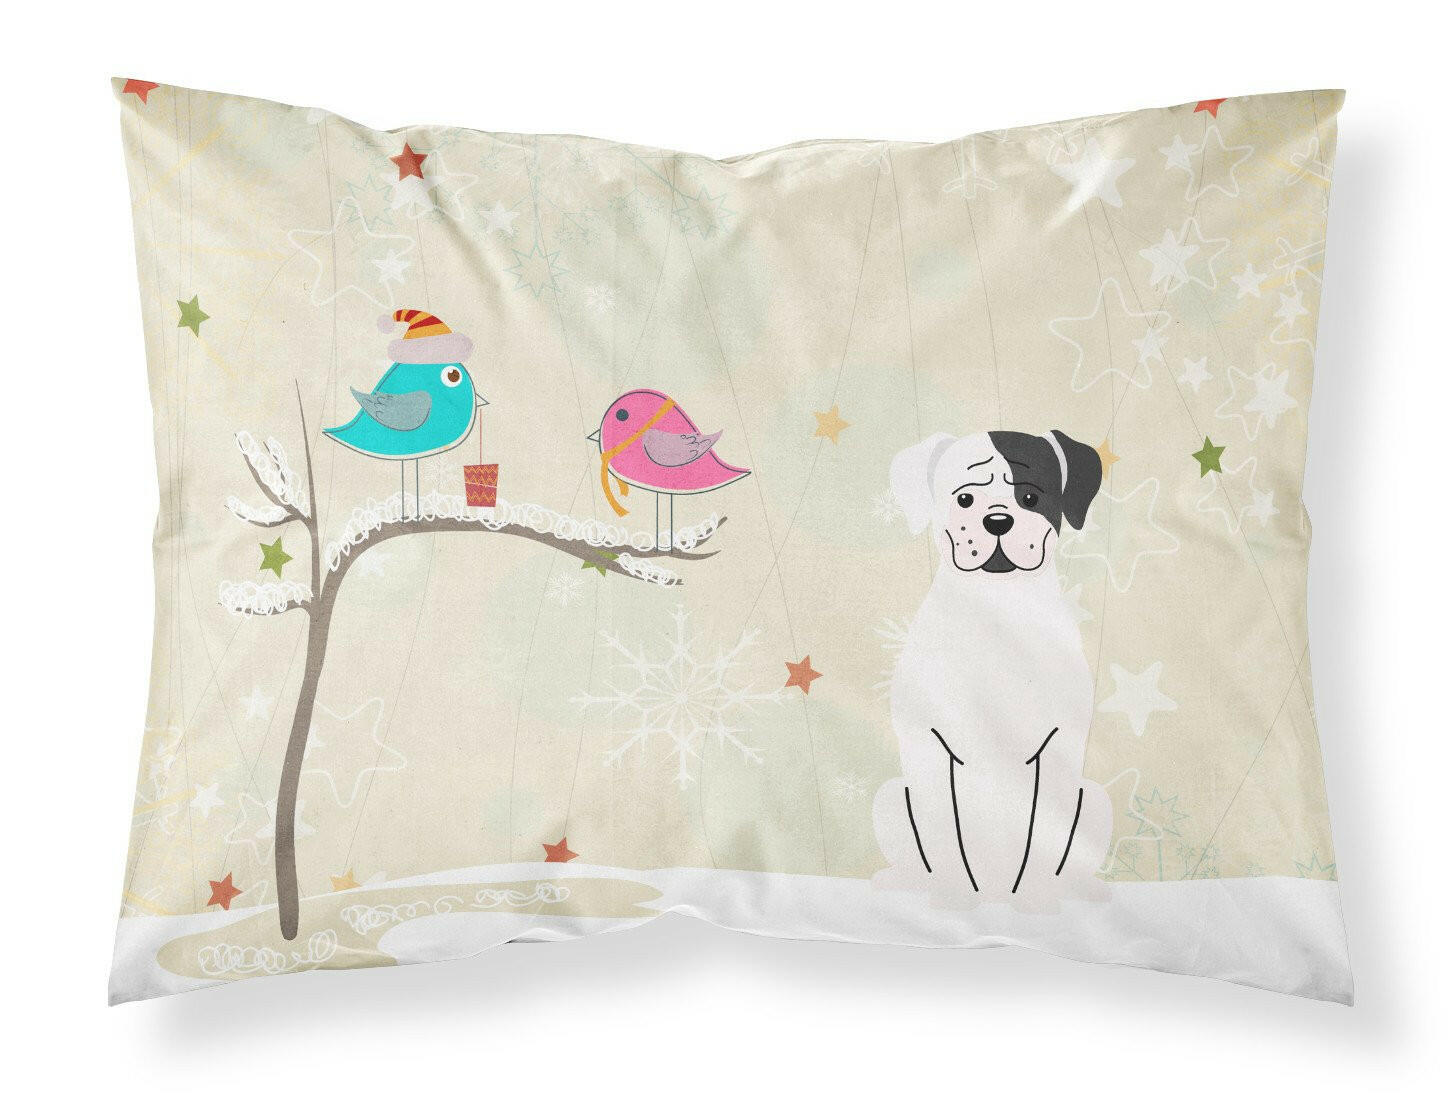 Christmas Presents between Friends White Boxer Cooper Fabric Standard Pillowcase BB2586PILLOWCASE by Caroline's Treasures